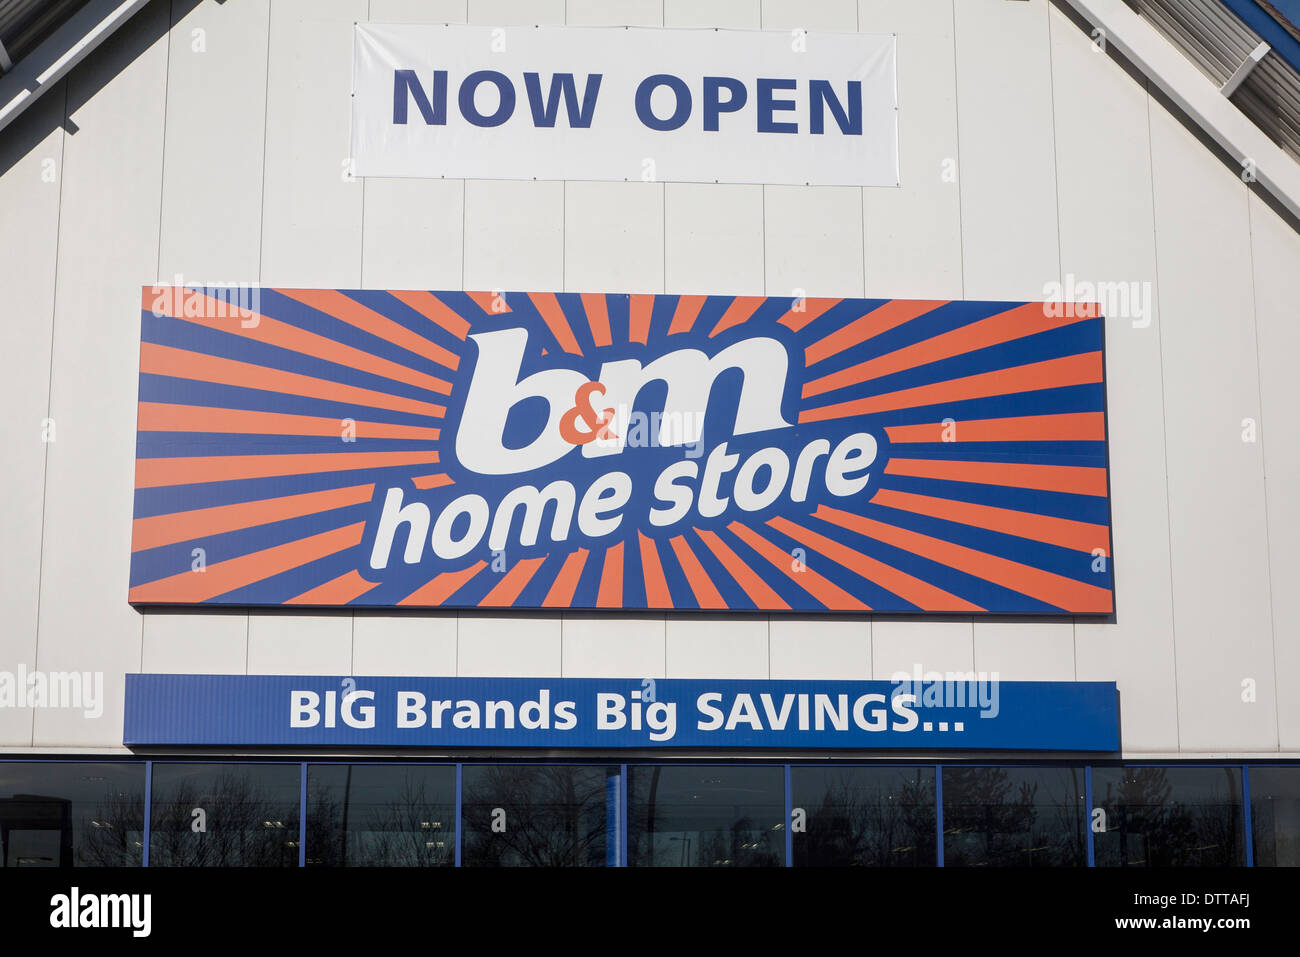 b&m home store now open sign, Copdock, Ipswich, England Stock Photo